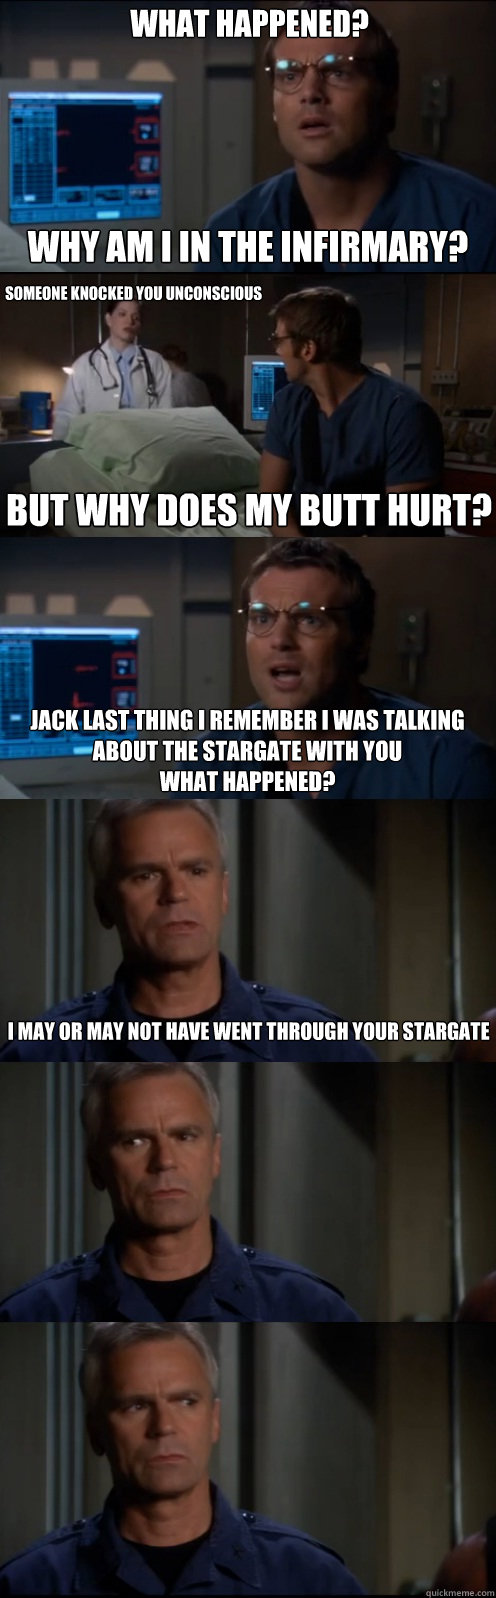 What Happened?  Why am I in the infirmary? Someone knocked you unconscious But why does my butt hurt? Jack last thing I remember I was talking about the stargate with you
What happened? I may or may not have went through your stargate - What Happened?  Why am I in the infirmary? Someone knocked you unconscious But why does my butt hurt? Jack last thing I remember I was talking about the stargate with you
What happened? I may or may not have went through your stargate  Through the Stargate